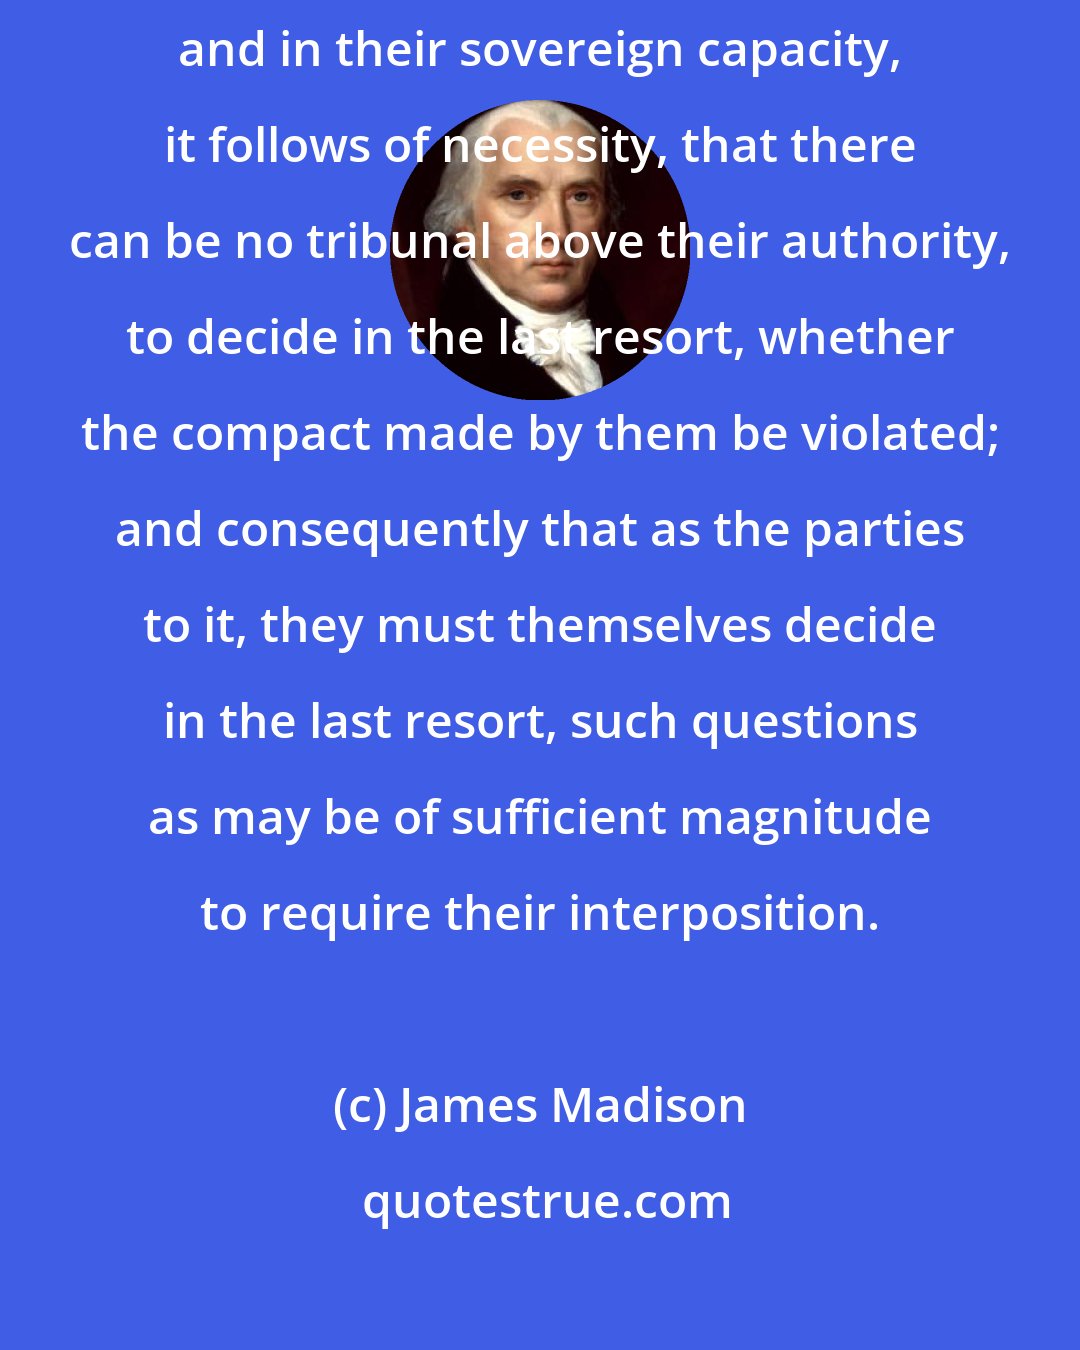 James Madison: The States then being the parties to the constitutional compact, and in their sovereign capacity, it follows of necessity, that there can be no tribunal above their authority, to decide in the last resort, whether the compact made by them be violated; and consequently that as the parties to it, they must themselves decide in the last resort, such questions as may be of sufficient magnitude to require their interposition.